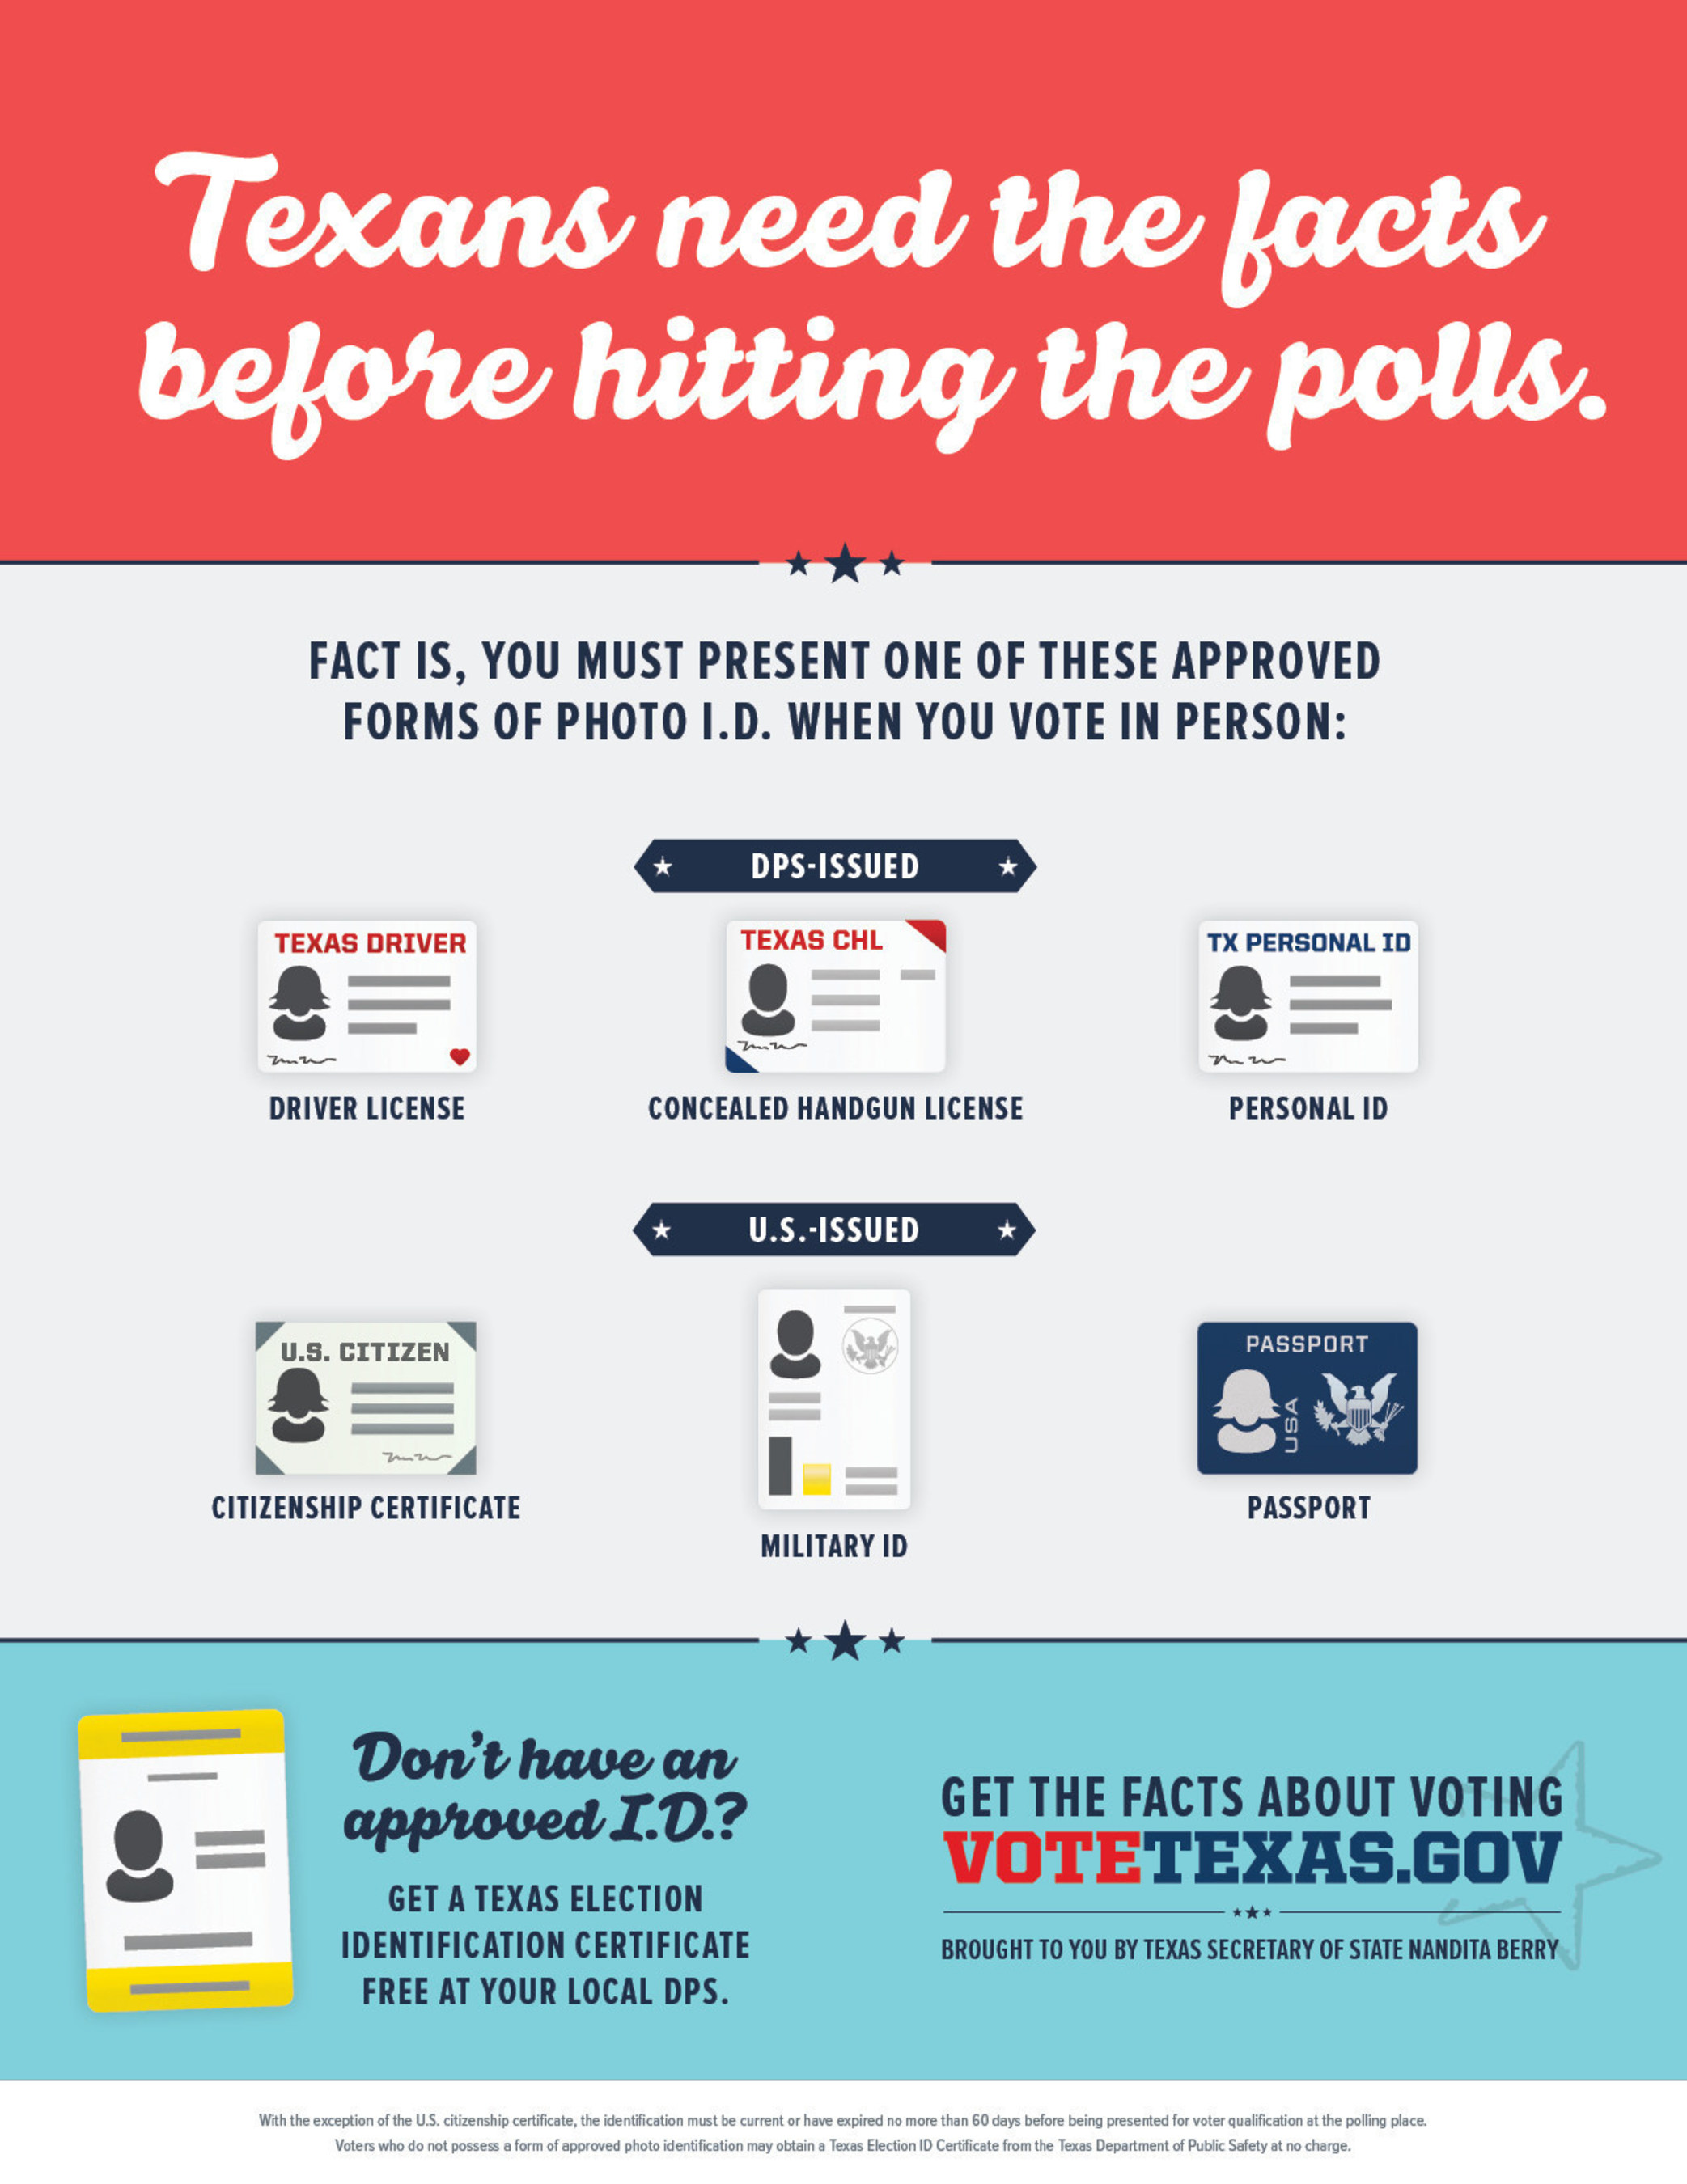 Voters in Texas need to bring one of seven approved forms of photo ID to the polls in order to vote in the General Election. Early Voting begins October 20 and Election Day is November 4.